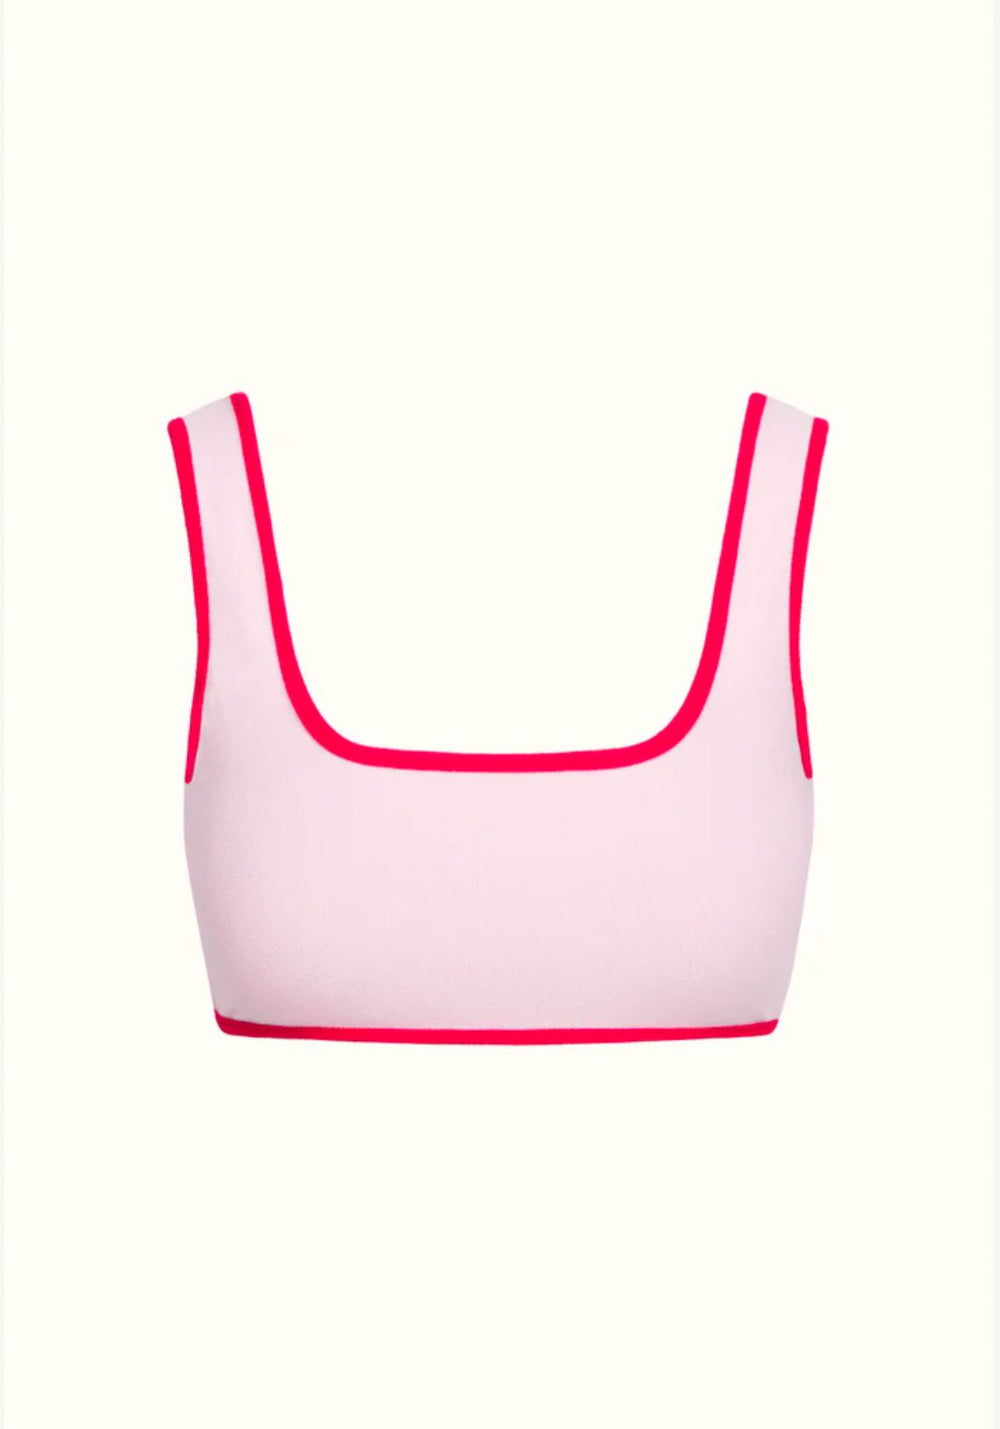 TERRY ATHLETIC TOP REVERSIBLE